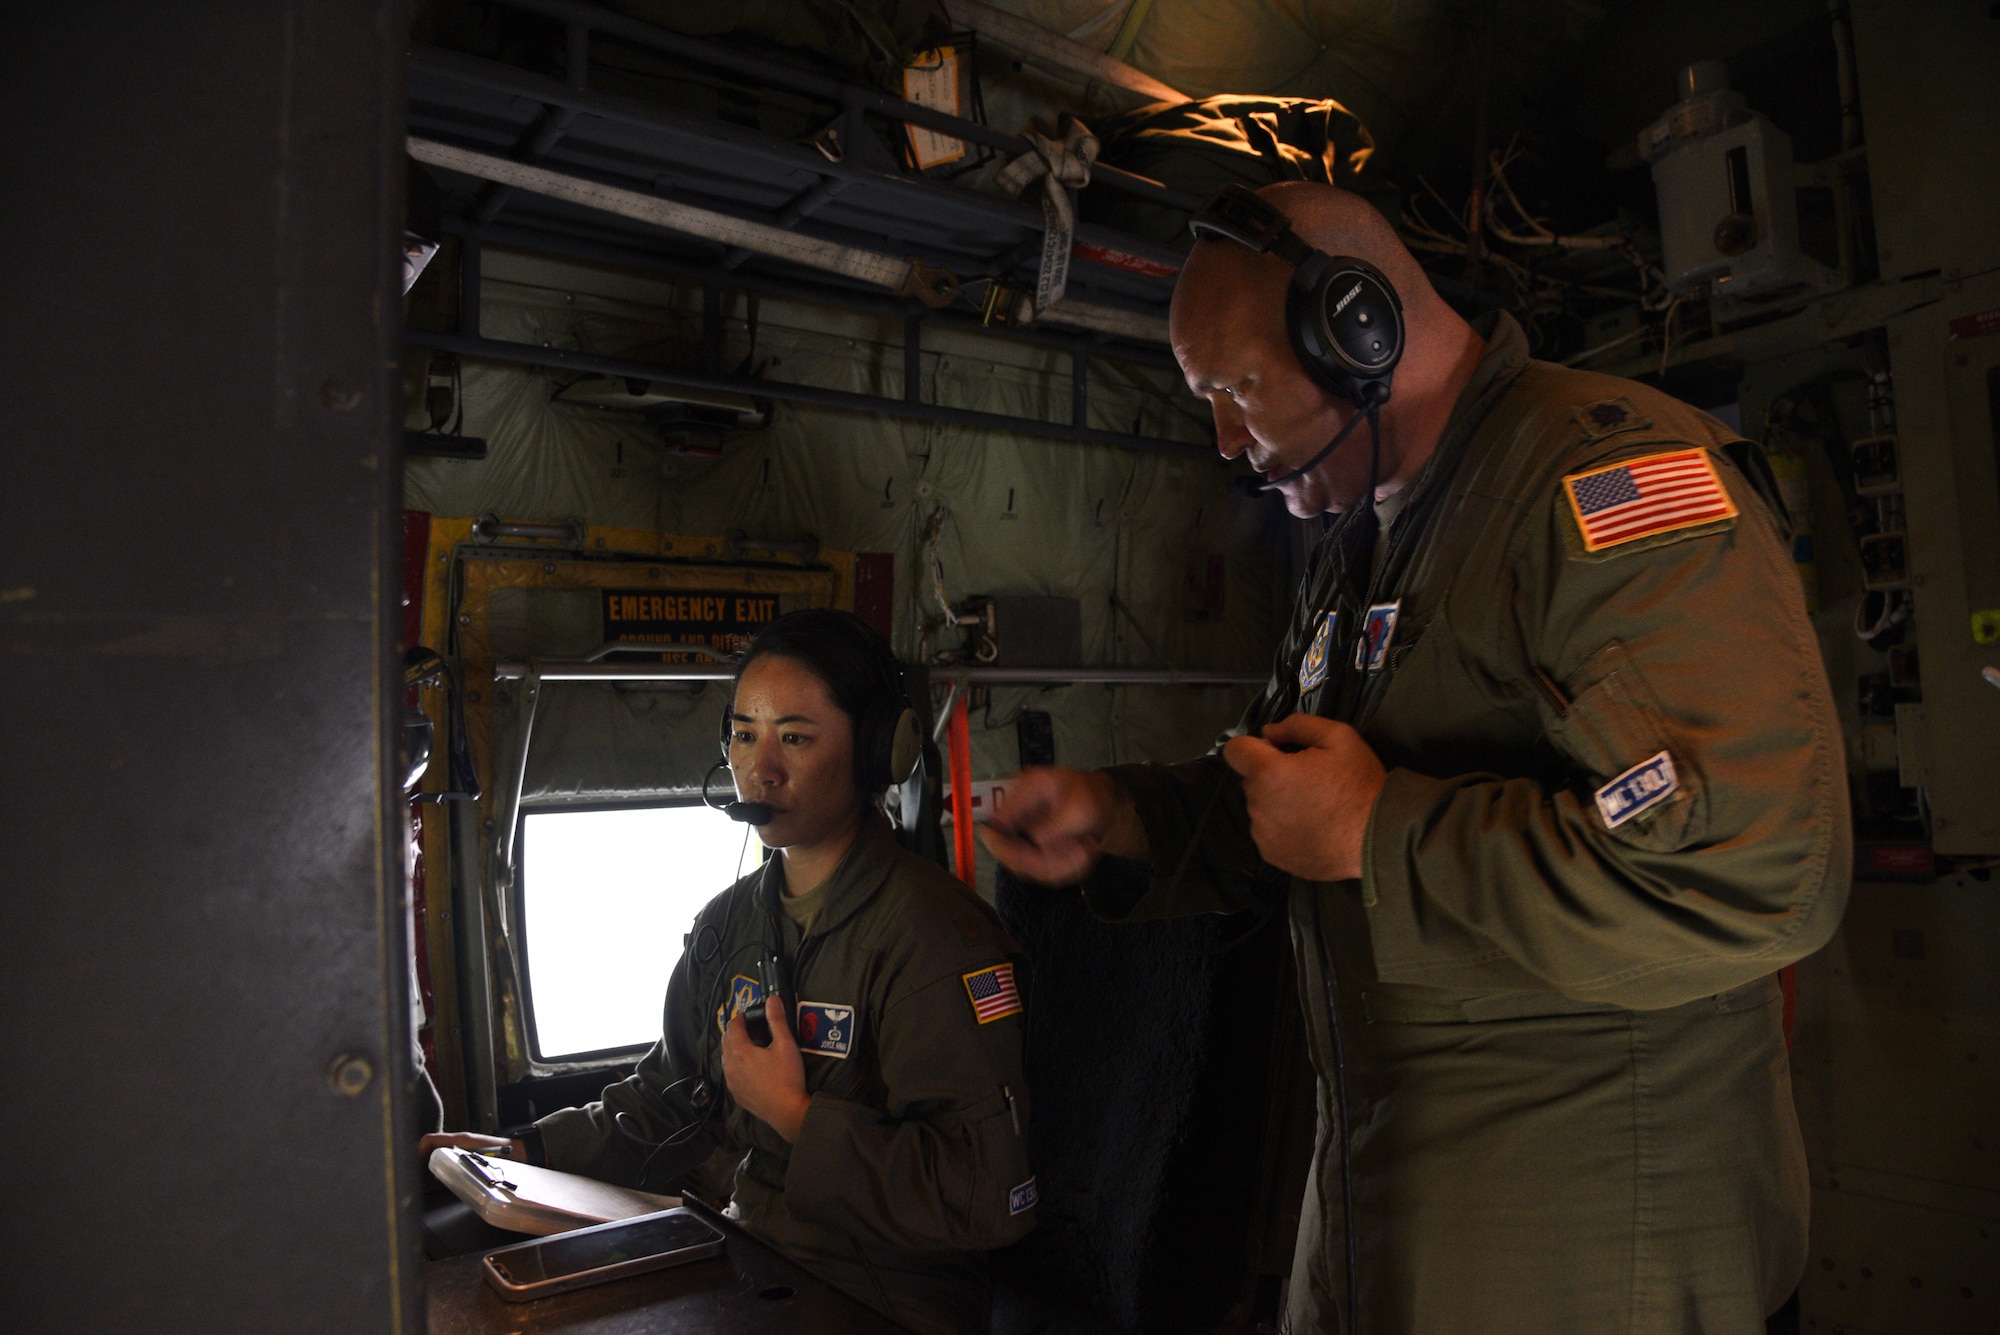 Lt. Col. Ryan Rickert and Maj. Joyce Hirai, 53rd Weather Reconnaissance Squadron aerial reconnaissance weather officers, discuss the weather data as the Hurricane Hunters fly into Hurricane Sam, Sept. 27, 2021. Hurricane Sam had downgraded to a category 3 hurricane when the AF Reserve Hurricane Hunters entered, but was intensifying before they headed back. The Hurricane Hunters gather data weather data from dropsondes and aircraft sensors, which is given to the National Hurricane Center to assist them with their forecasts and storm warnings. (U.S. Air Force photo by Jessica L. Kendziorek)